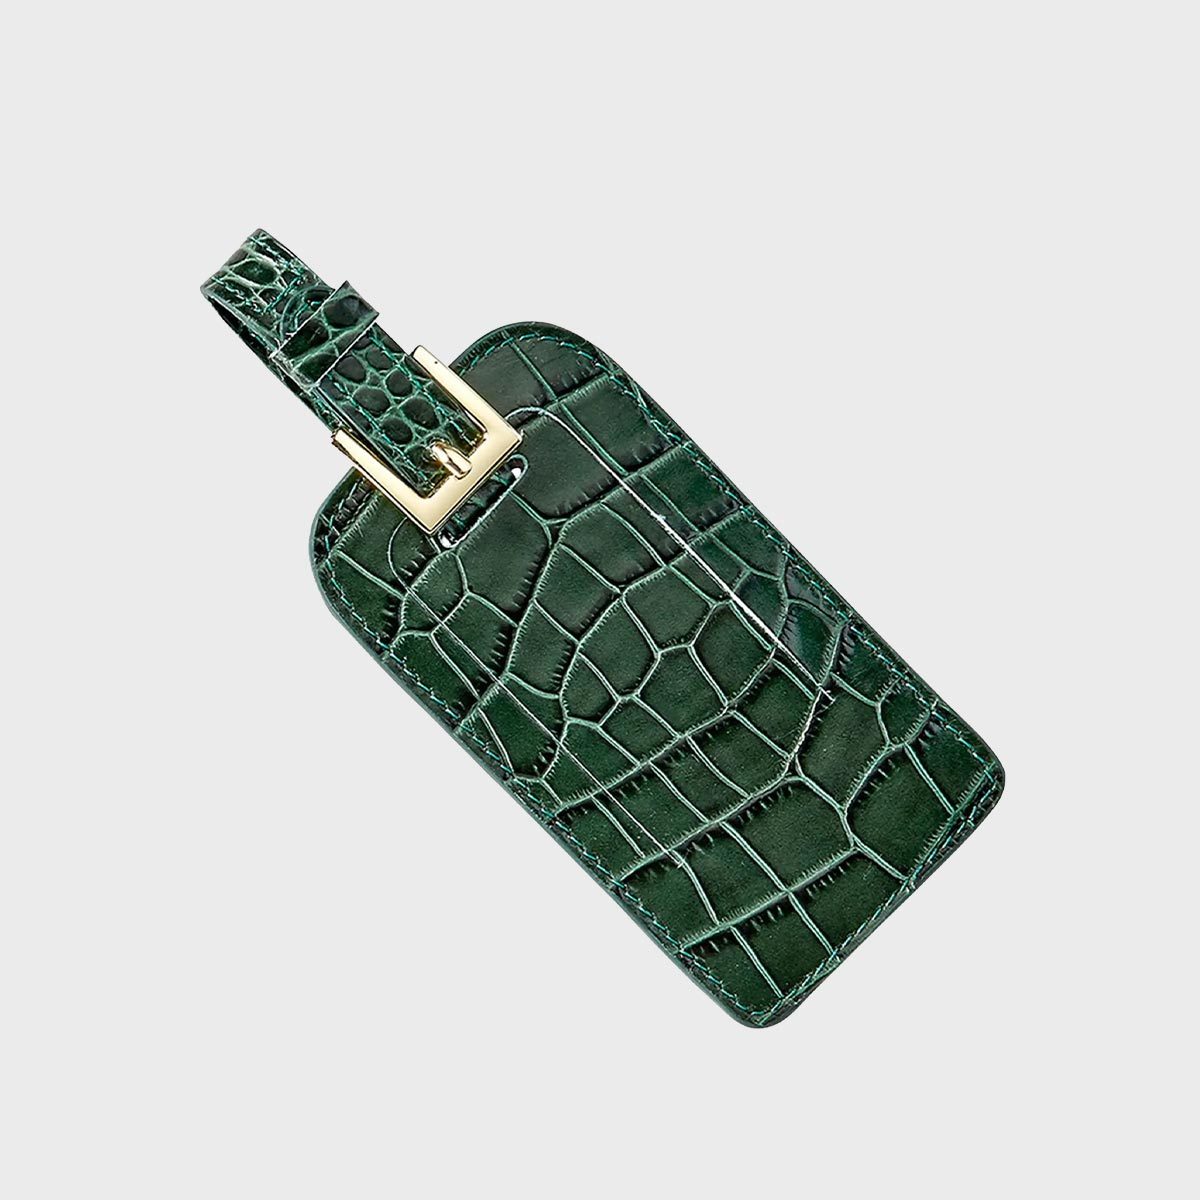 <p>What's better than a leather luggage tag? A <a href="https://www.neimanmarcus.com/p/graphic-image-luggage-tag-prod246490672" rel="noopener">croc-embossed tag</a>. It secures with a buckle and has a hidden pocket for your information card. Just wipe it down to maintain its shine. Packing for an international getaway? Here are the things you should <a href="https://www.rd.com/list/things-never-to-forget-when-traveling-overseas/">never forget when traveling overseas</a>.</p> <p class="listicle-page__cta-button-shop"><a class="shop-btn" href="https://www.neimanmarcus.com/p/graphic-image-luggage-tag-prod246490672">Shop Now</a></p>